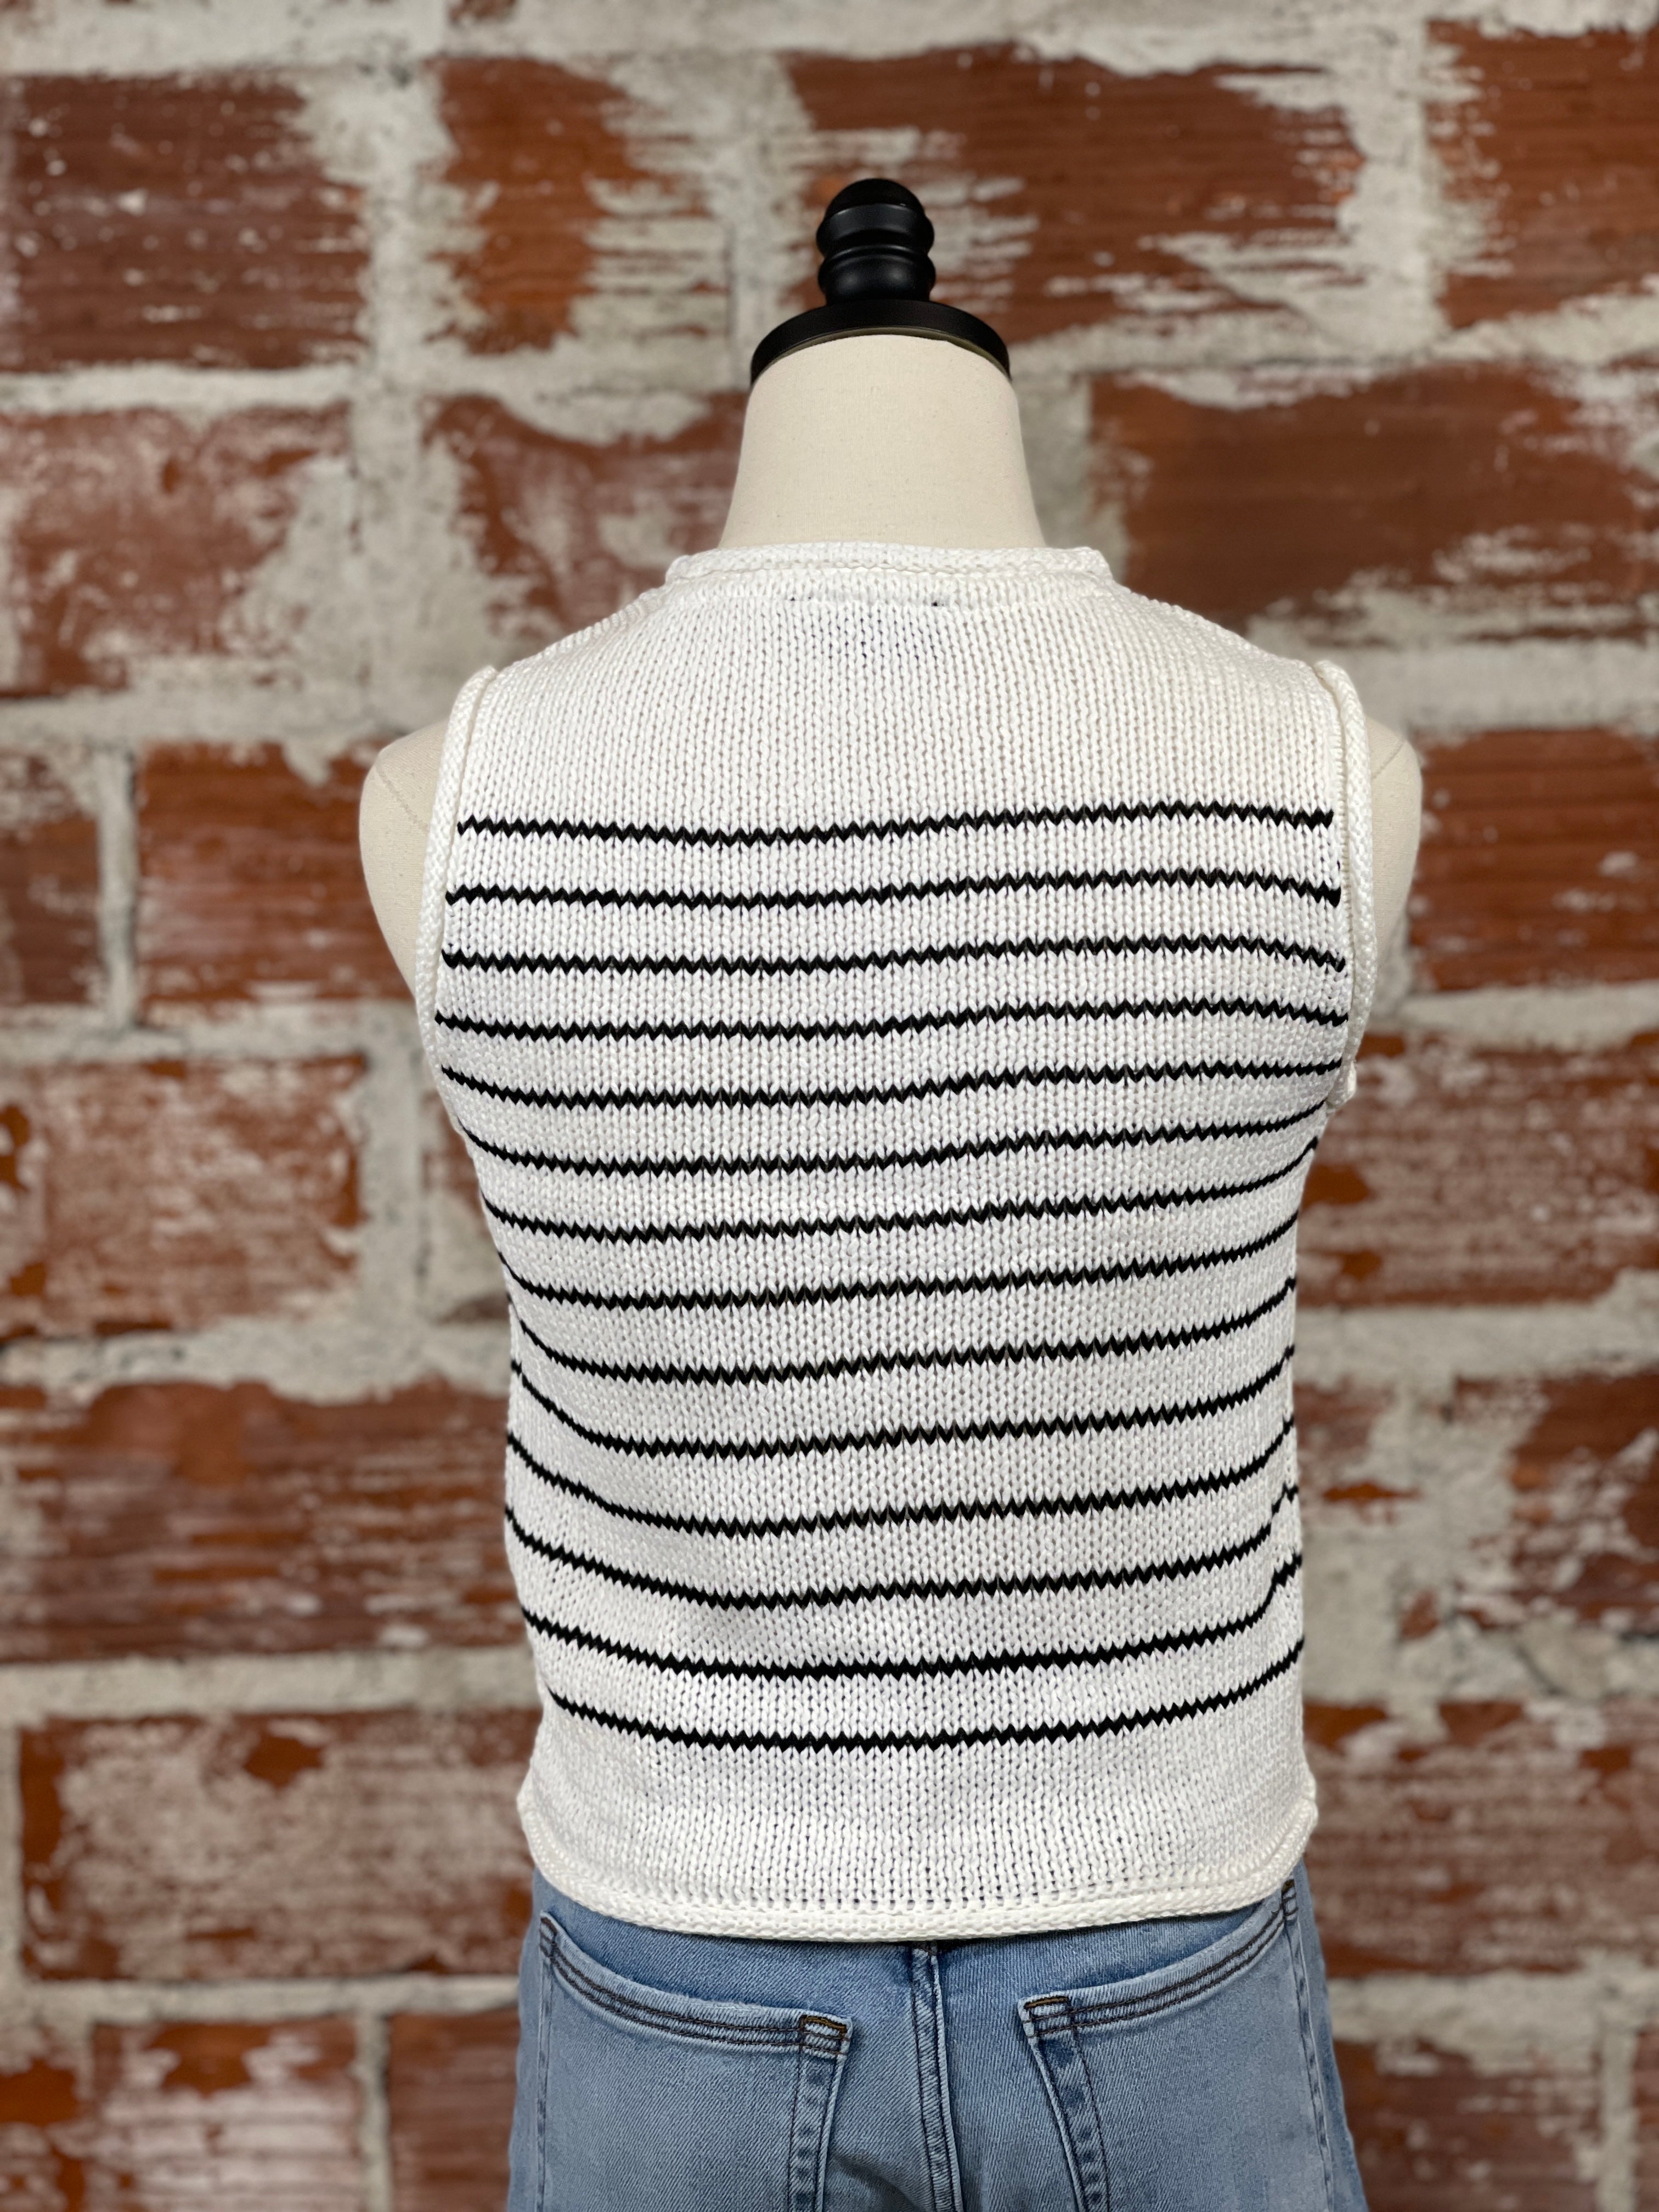 Kerensa Sweater Tank in Black and White-132 - Sweaters S/S (Jan - June)-Little Bird Boutique